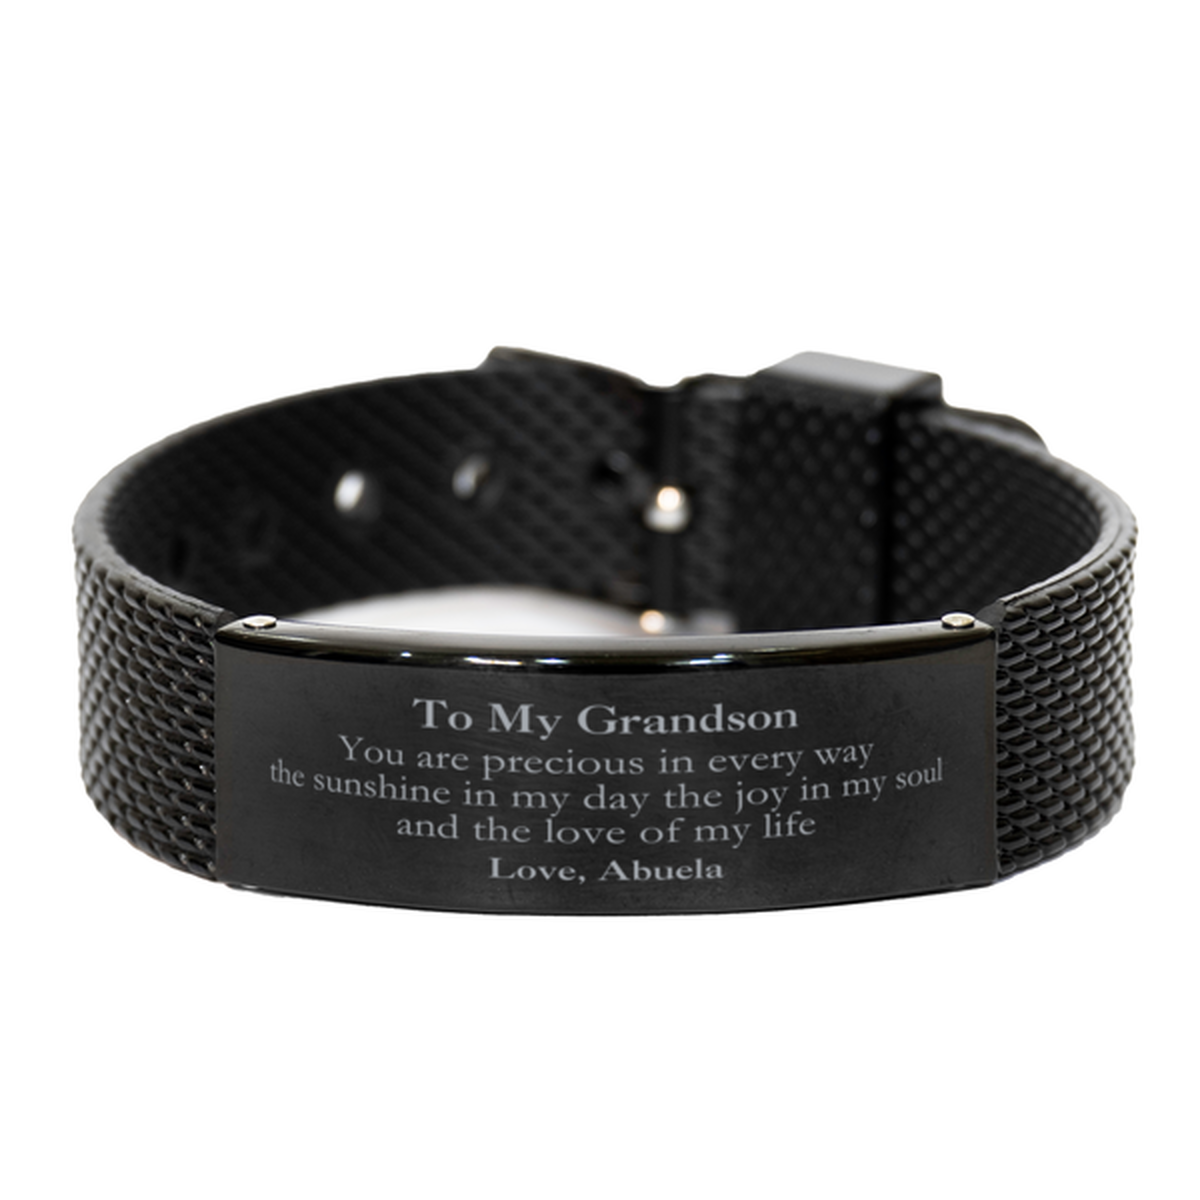 Graduation Gifts for Grandson Black Shark Mesh Bracelet Present from Abuela, Christmas Grandson Birthday Gifts Grandson You are precious in every way the sunshine in my day. Love, Abuela